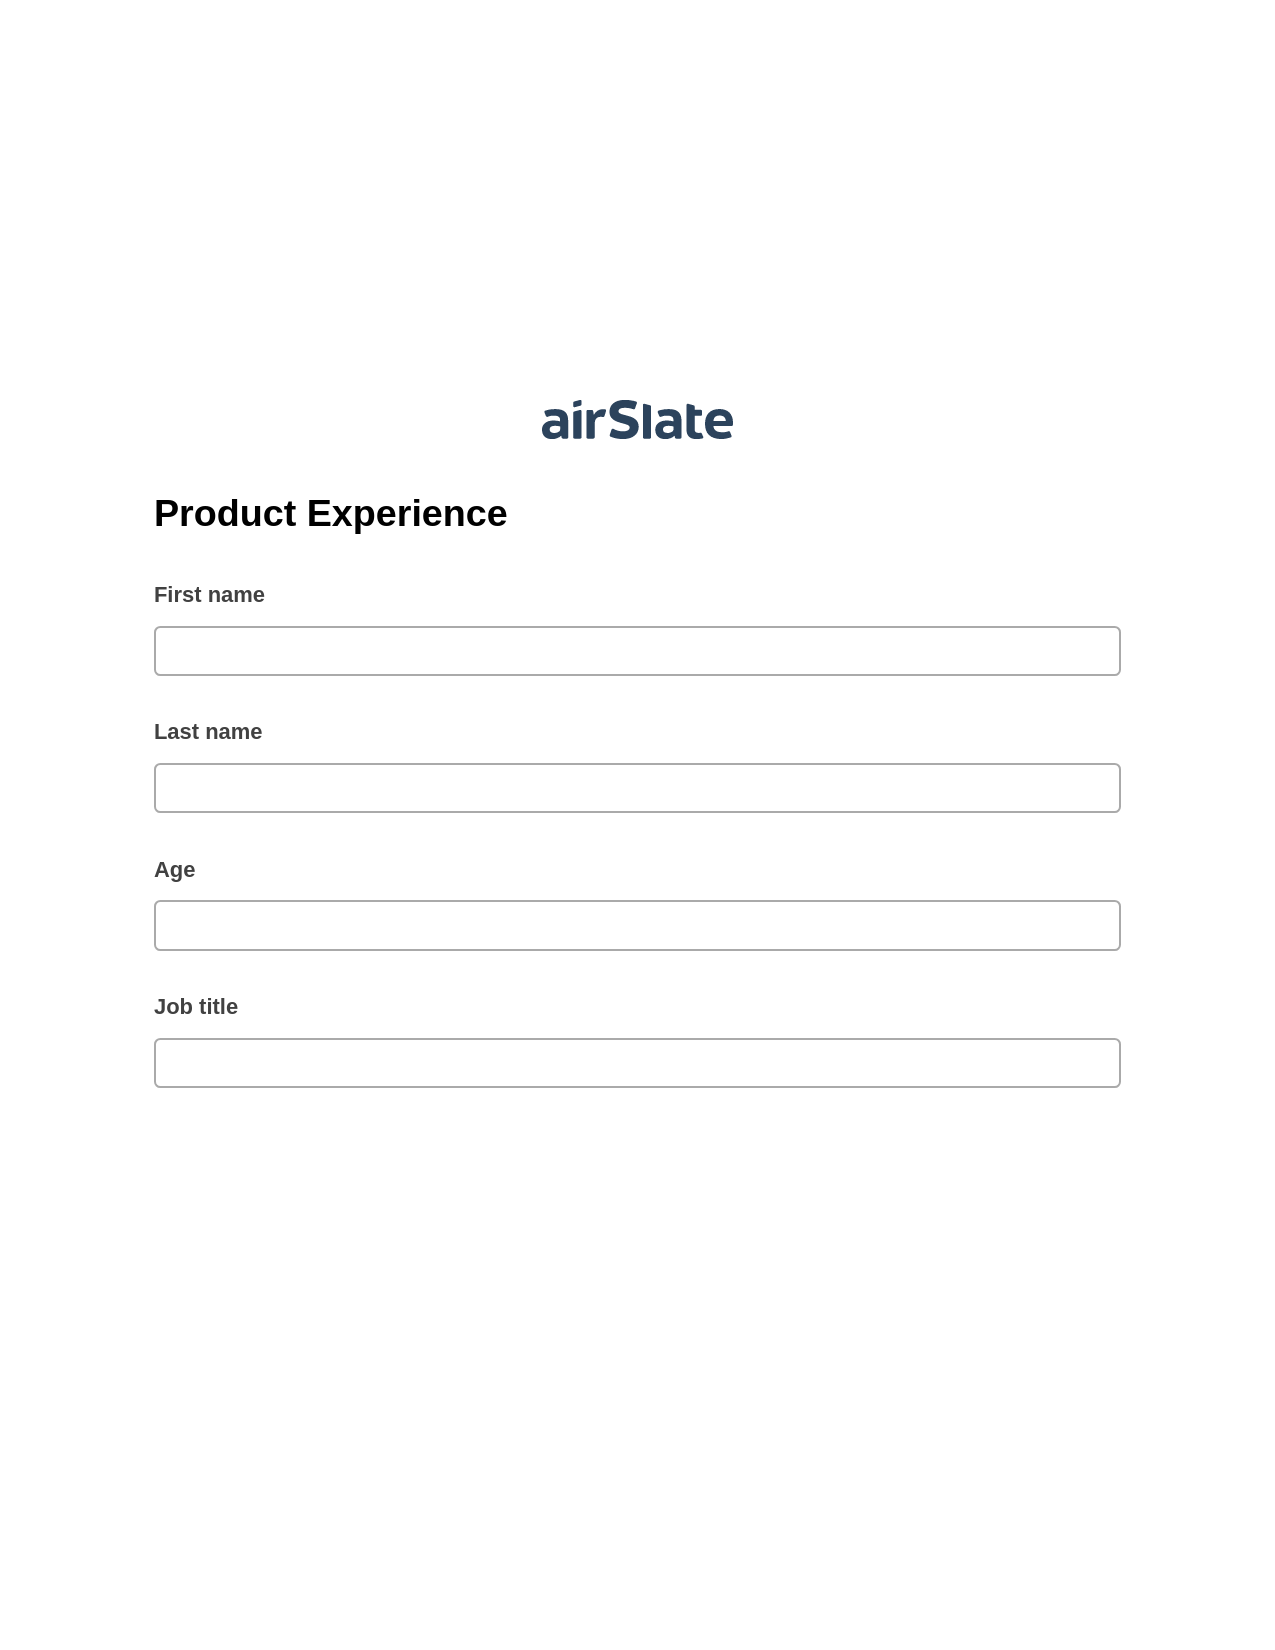 Product Experience Pre-fill from MS Dynamics 365 Records, Unassign Role Bot, Slack Two-Way Binding Bot